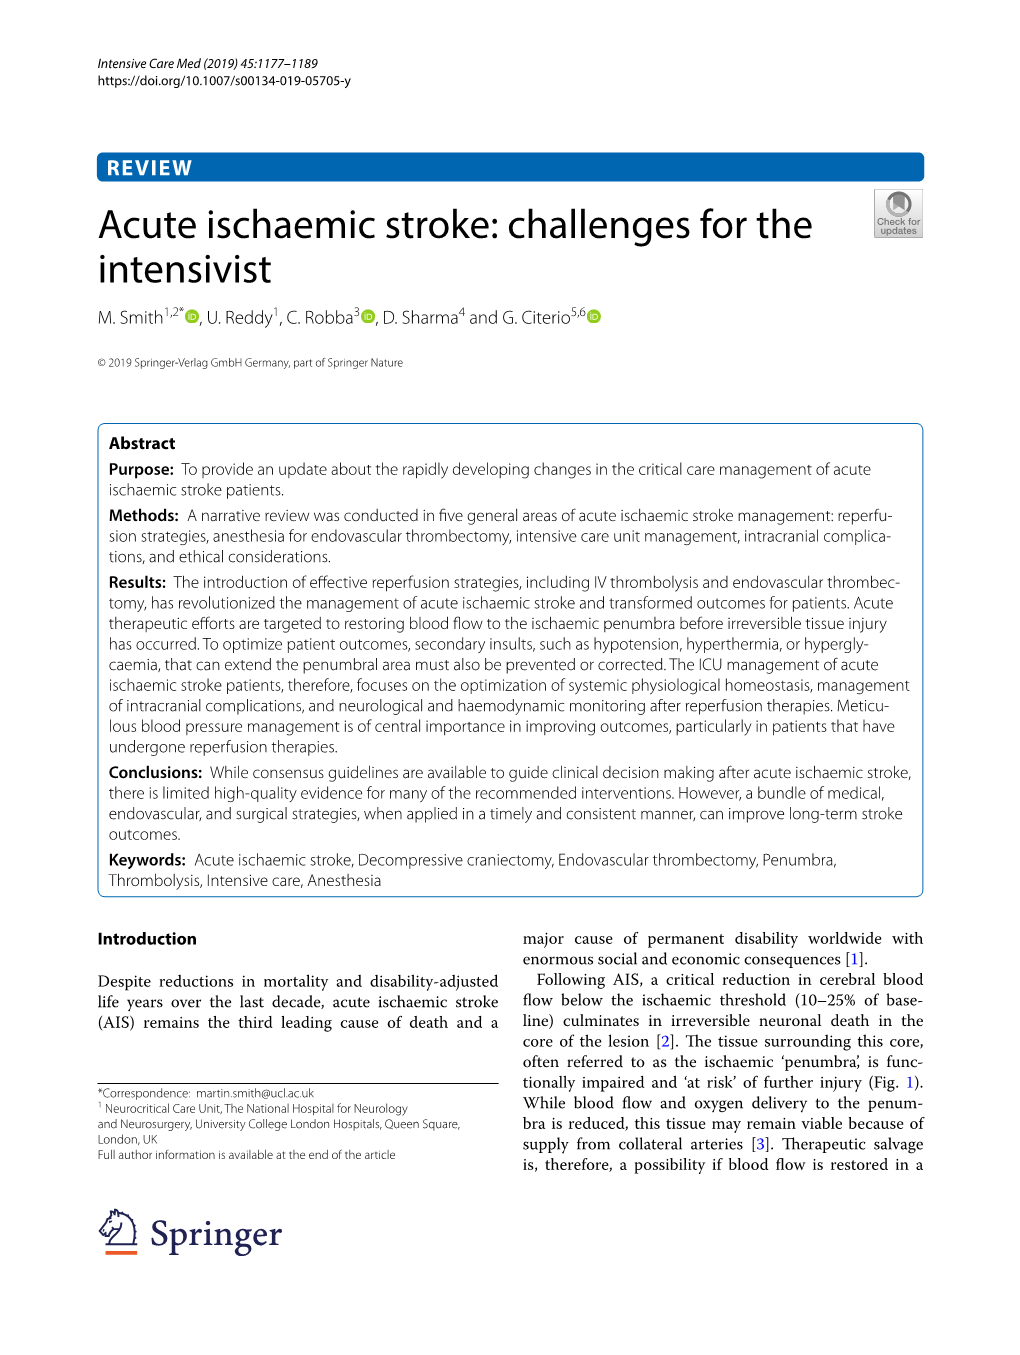 Acute Ischaemic Stroke: Challenges for the Intensivist M